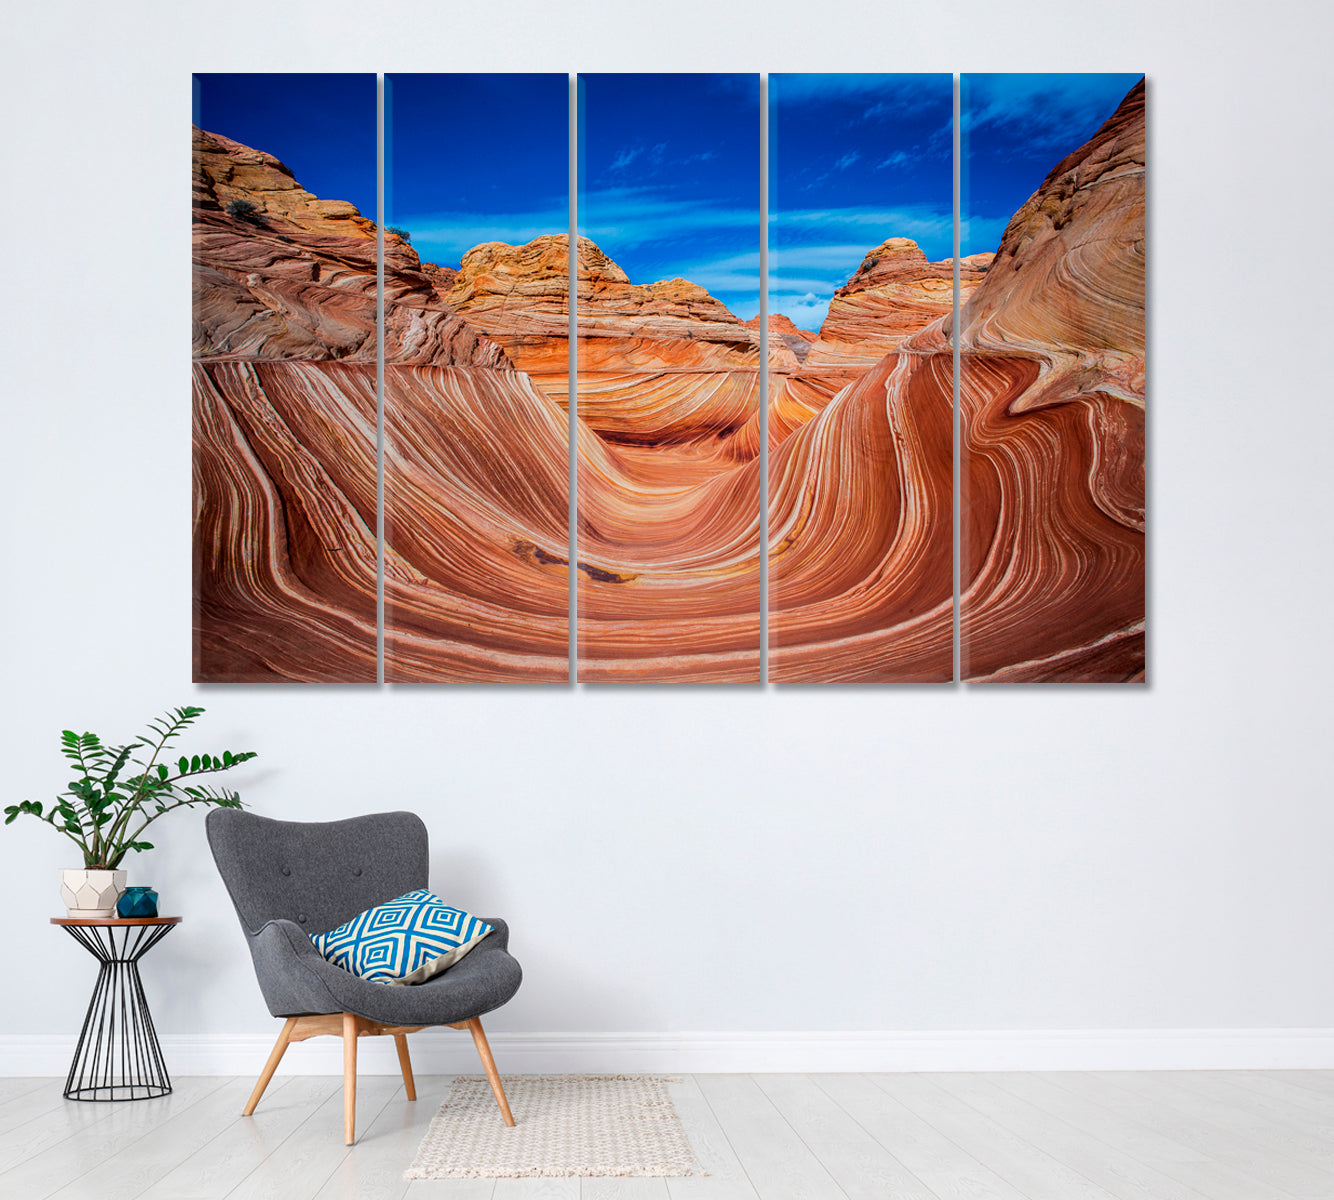 North Coyote Butte Arizona Canvas Print ArtLexy 5 Panels 36"x24" inches 